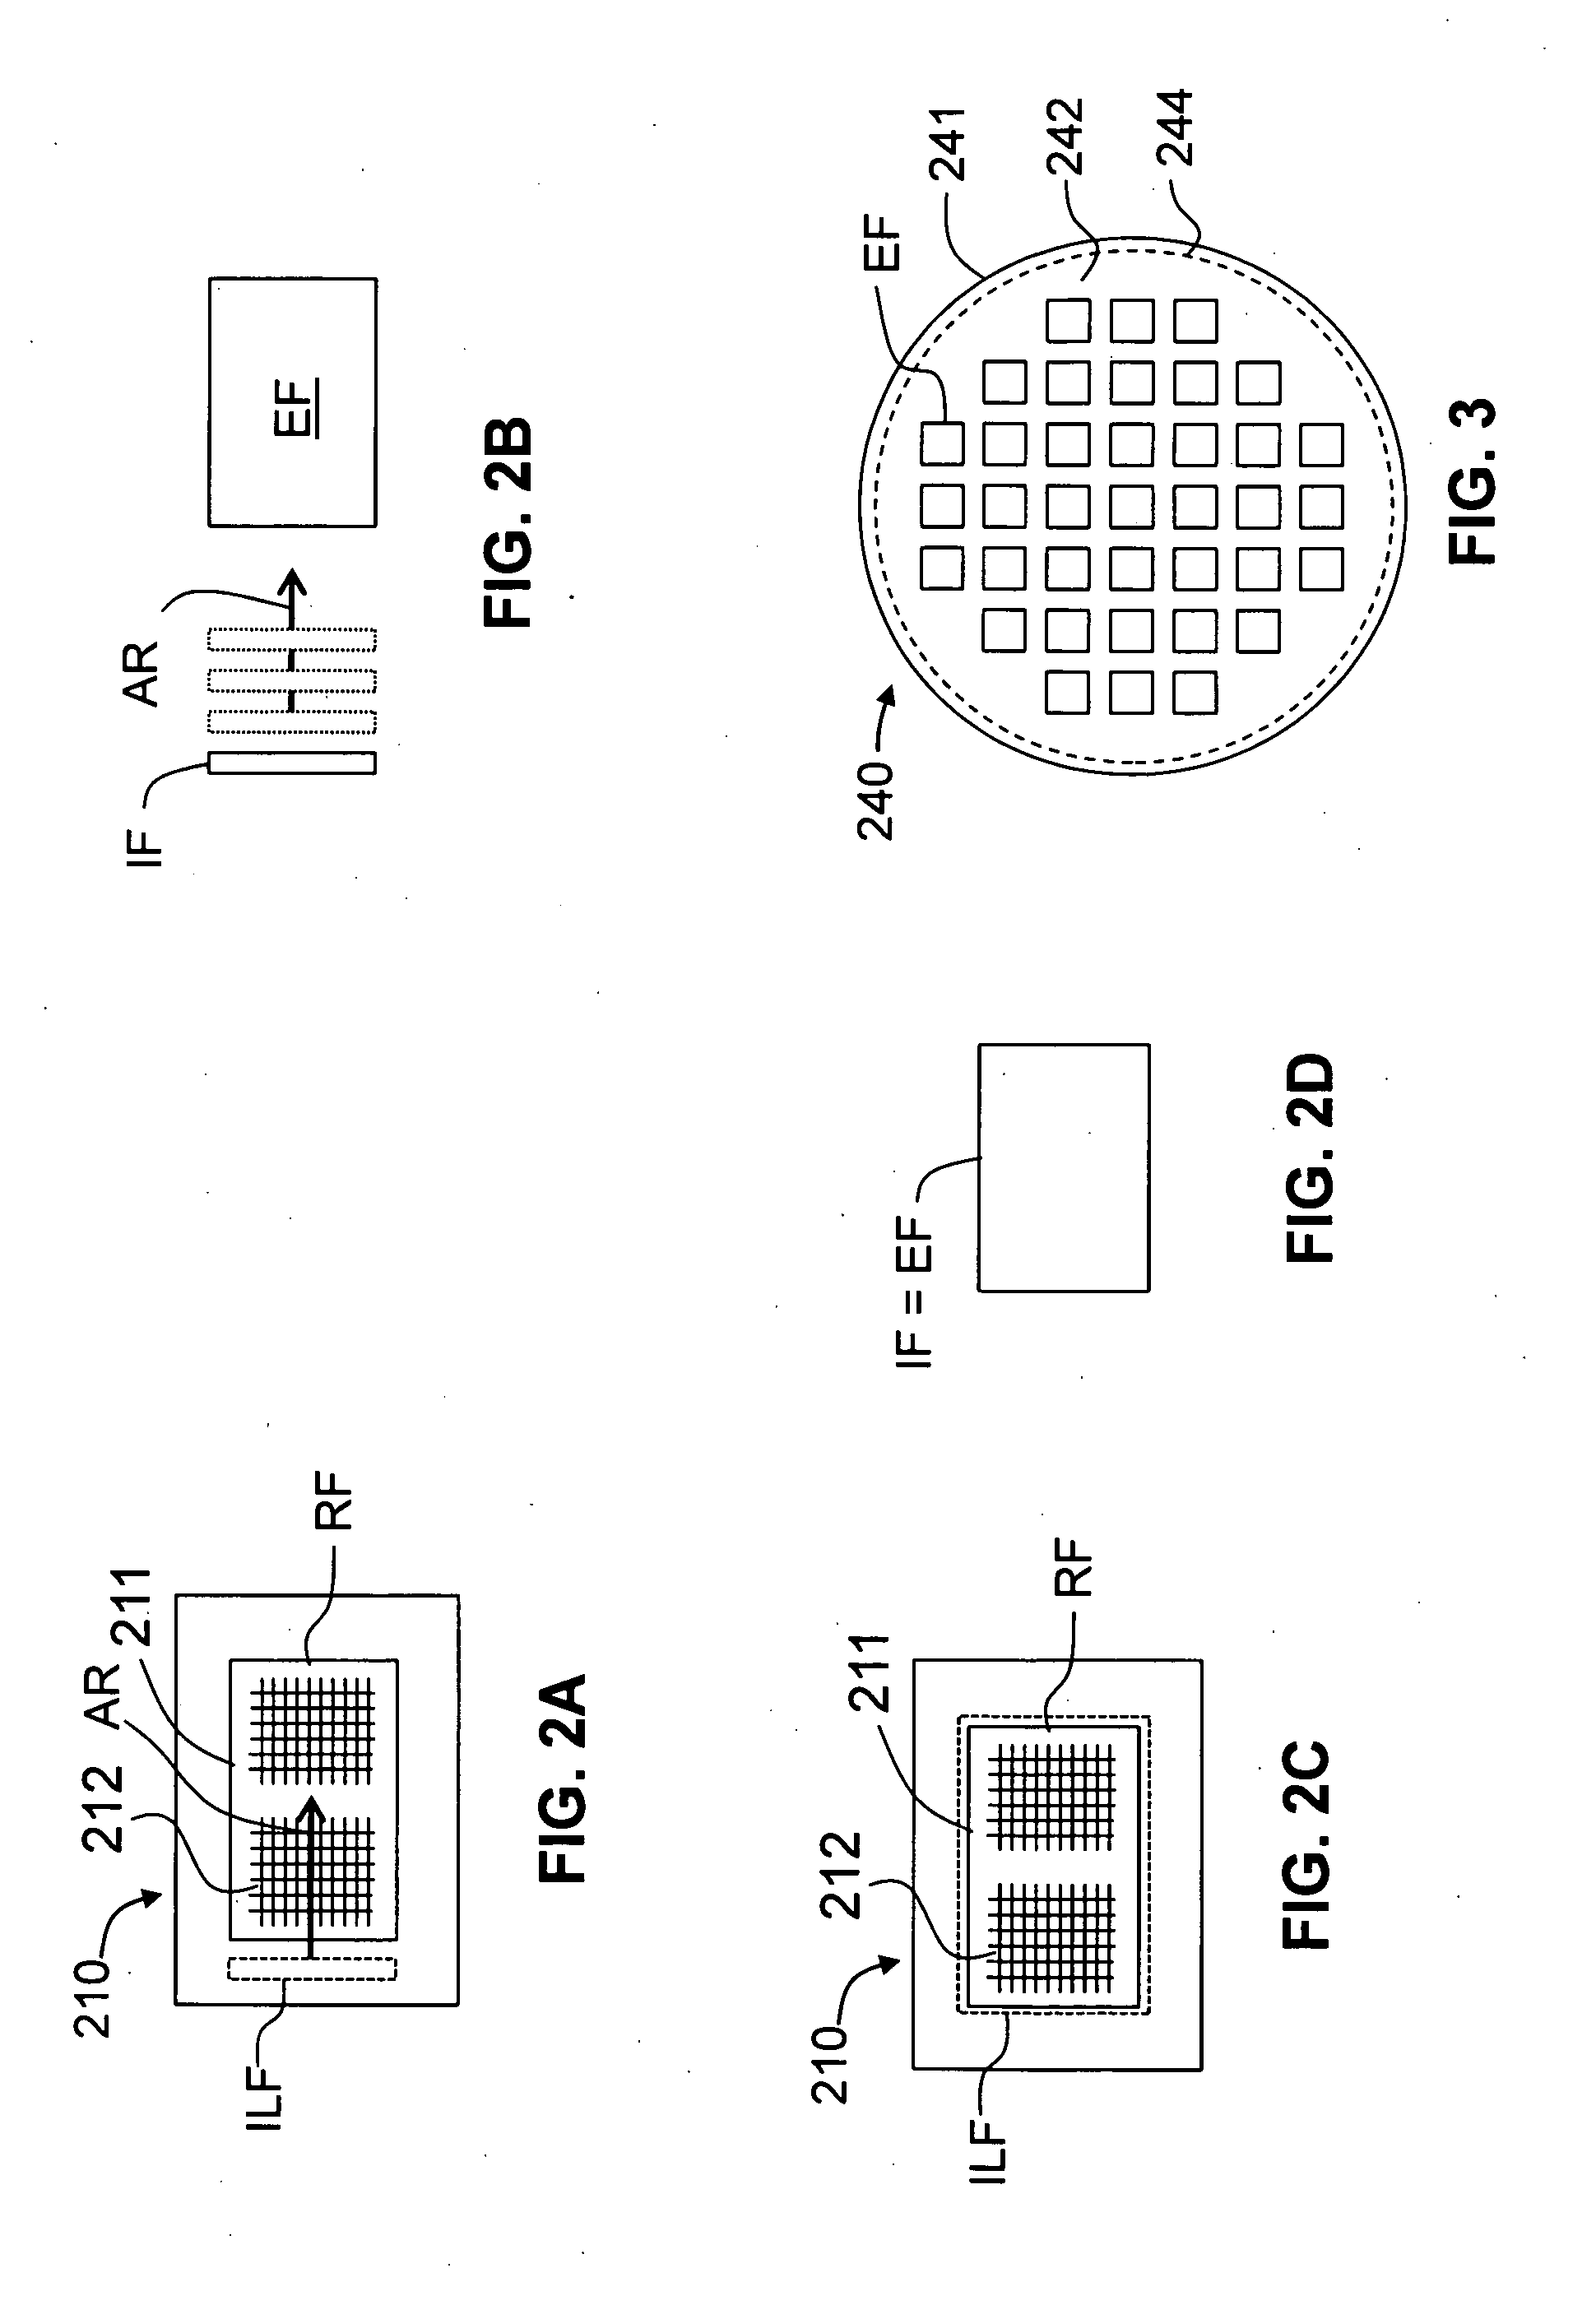 Programmable illuminator for a photolithography system